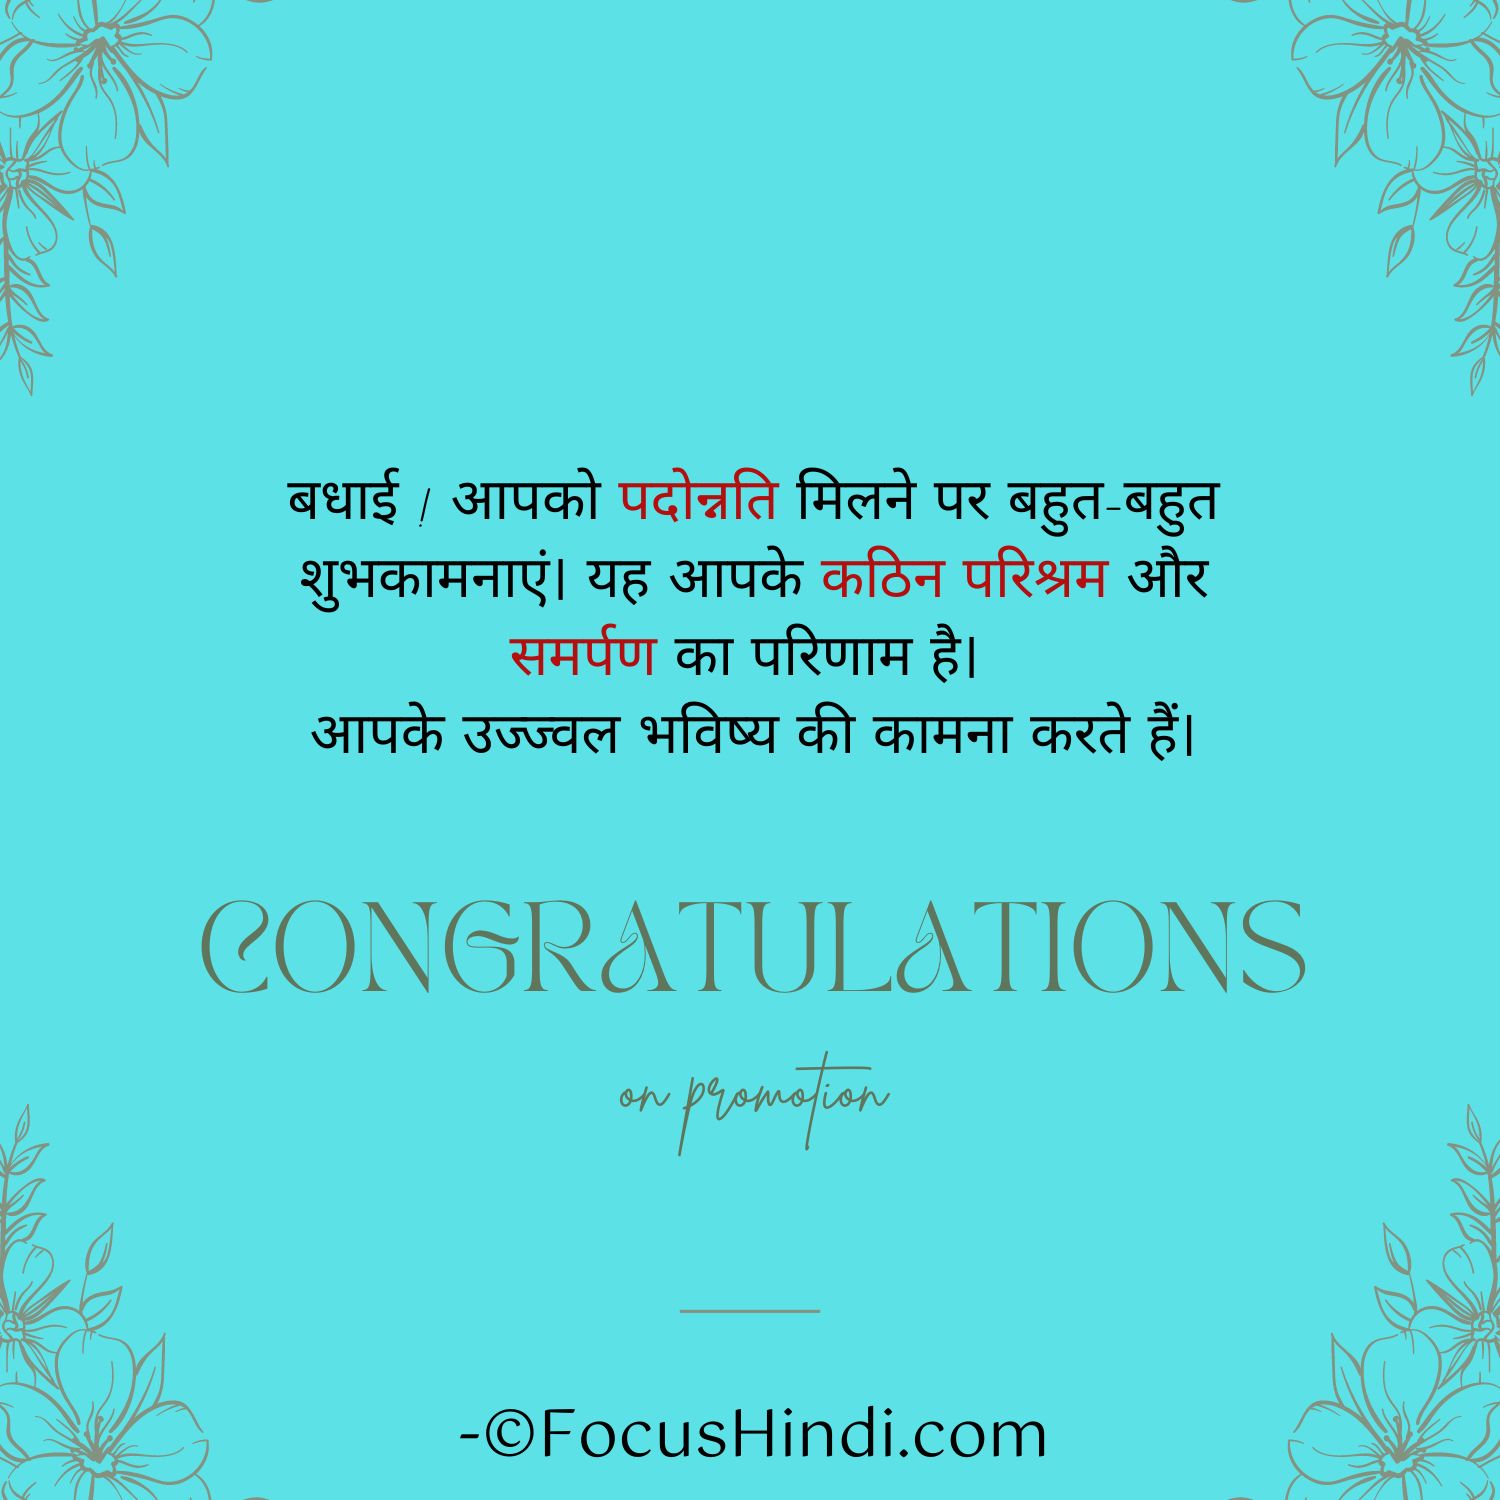 Congratulations message for promotion in hindi